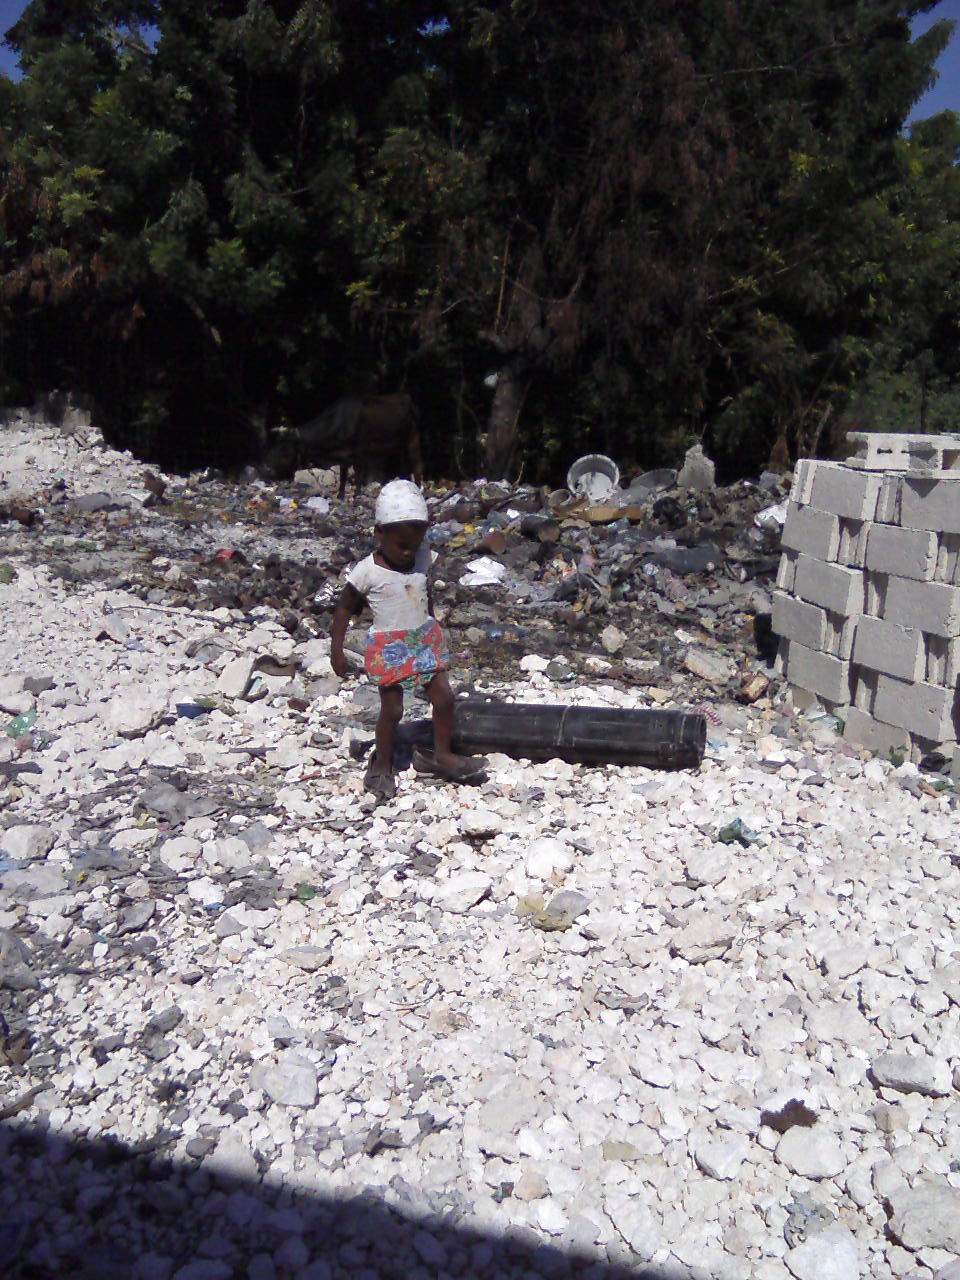 Mark Schuller: Haiti One Year Later: Light at the End of the ...